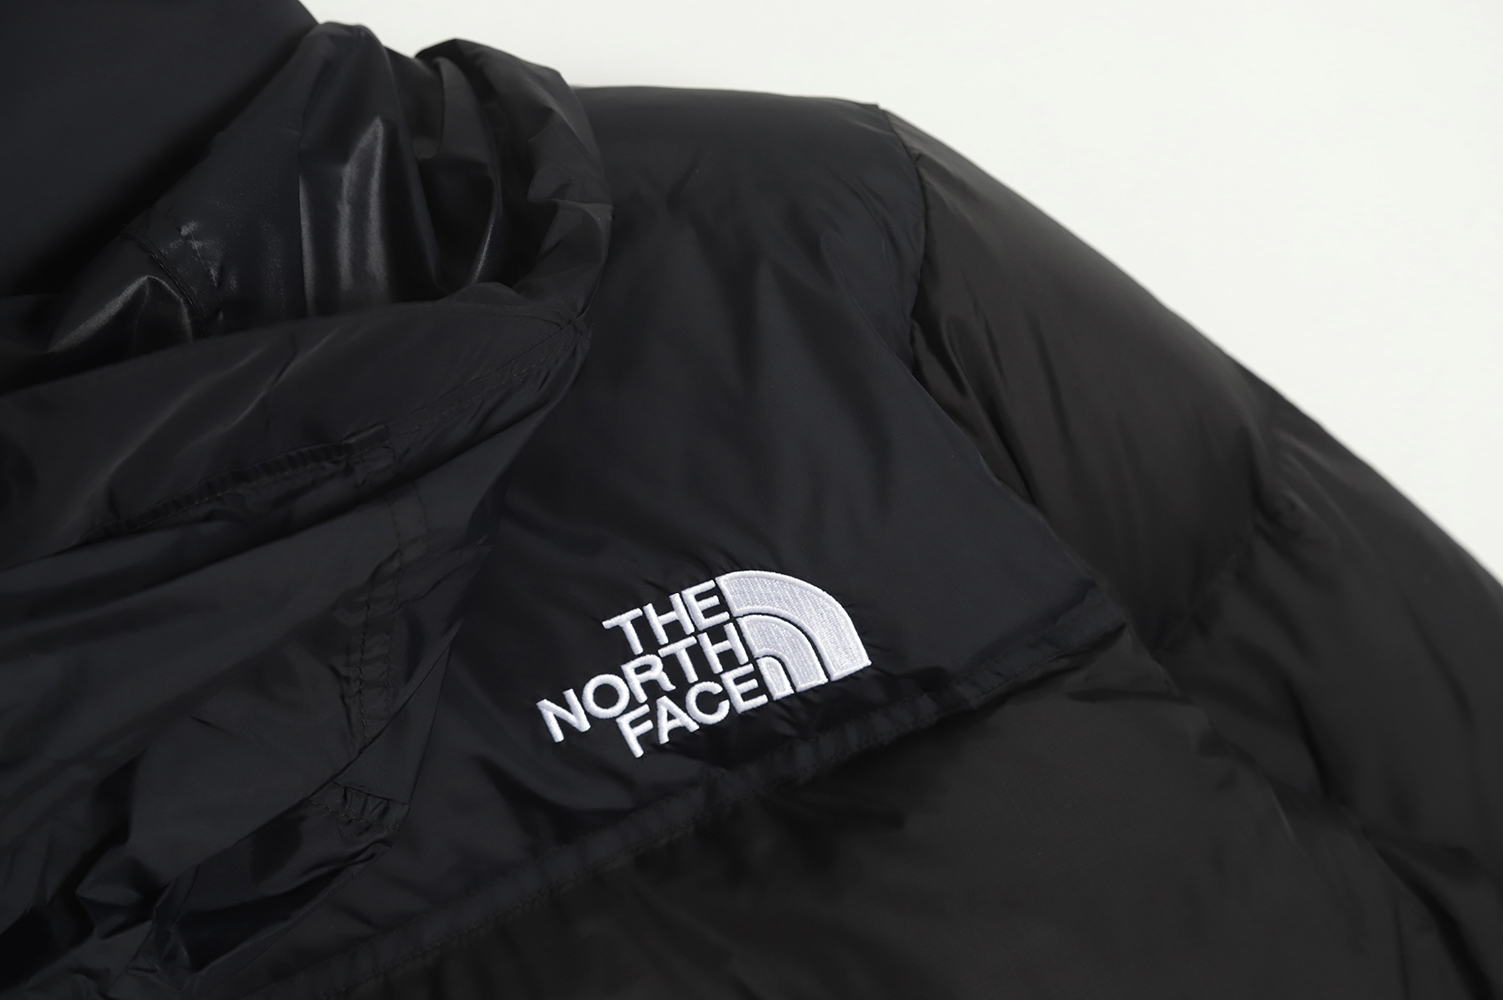 The North Face 1996 down jacket 5s version TSK9